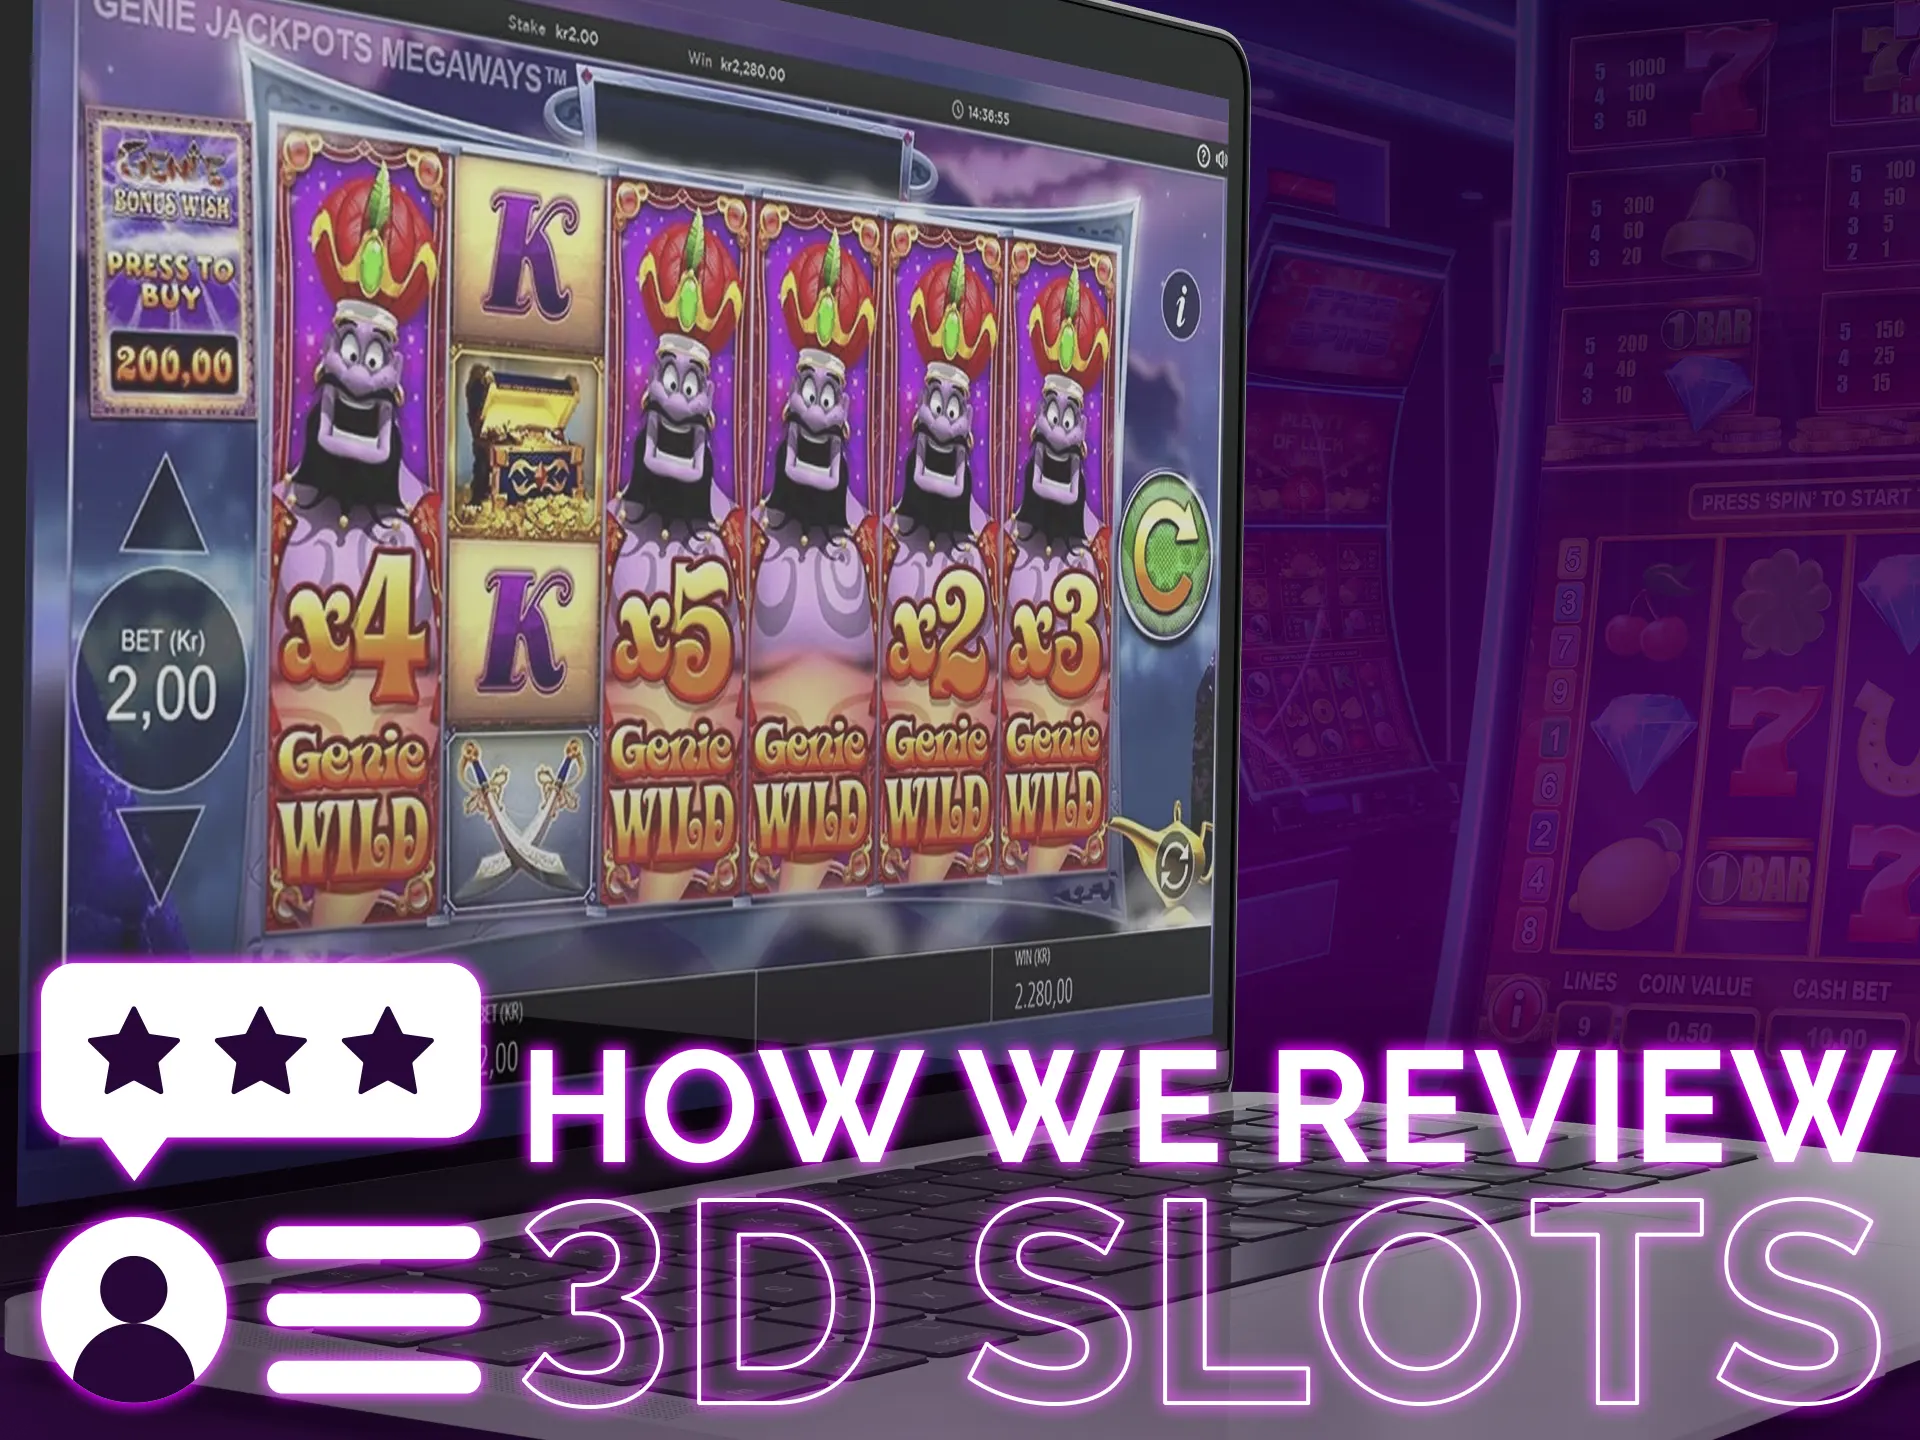 Find out what criteria you need to consider when choosing 3d slots.